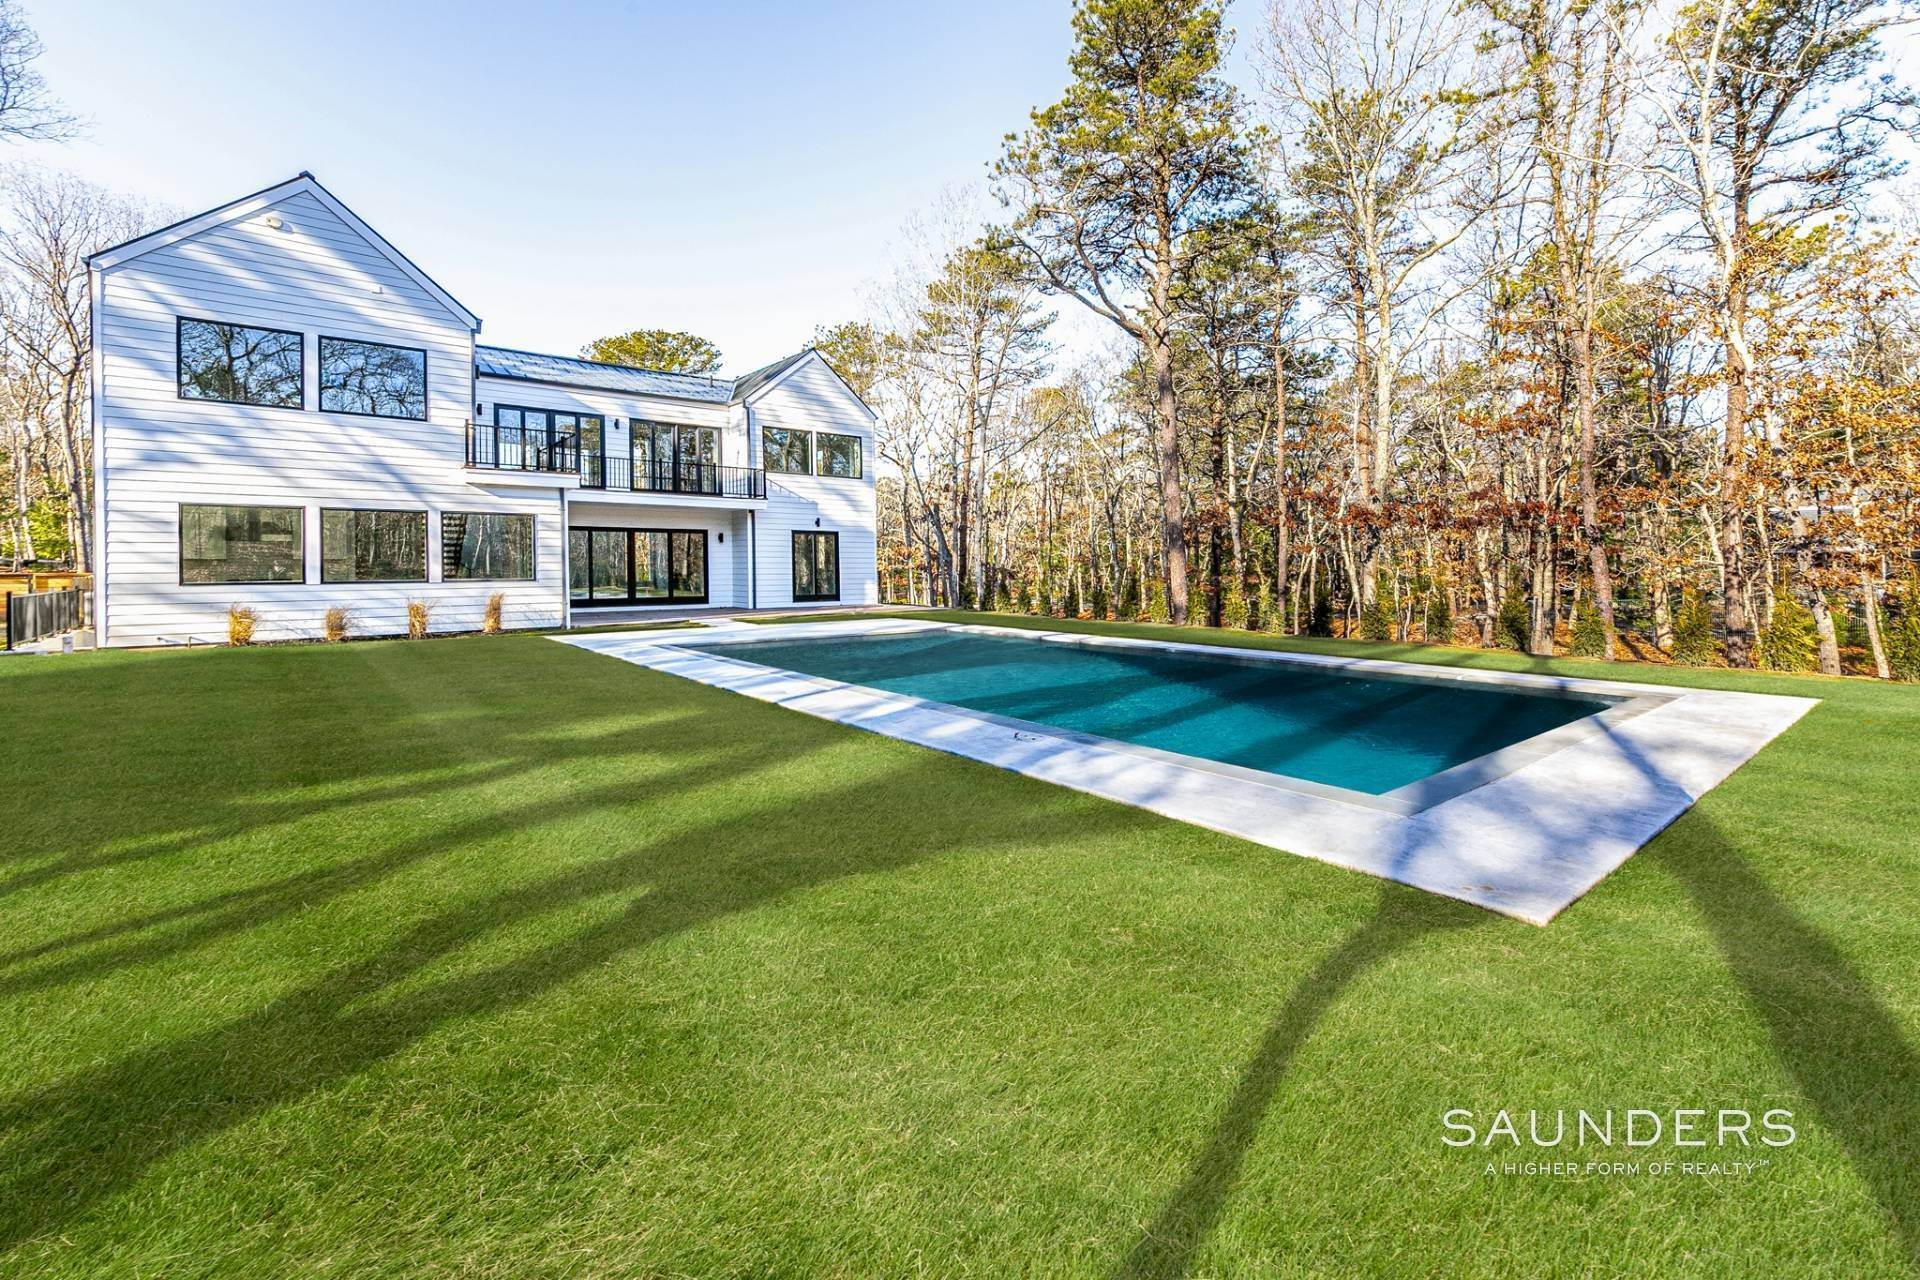 6. Single Family Homes for Sale at Unsurpassed Luxury And Elegance With This Brand New Construction 10 Van Scoys Path, East Hampton, NY 11937